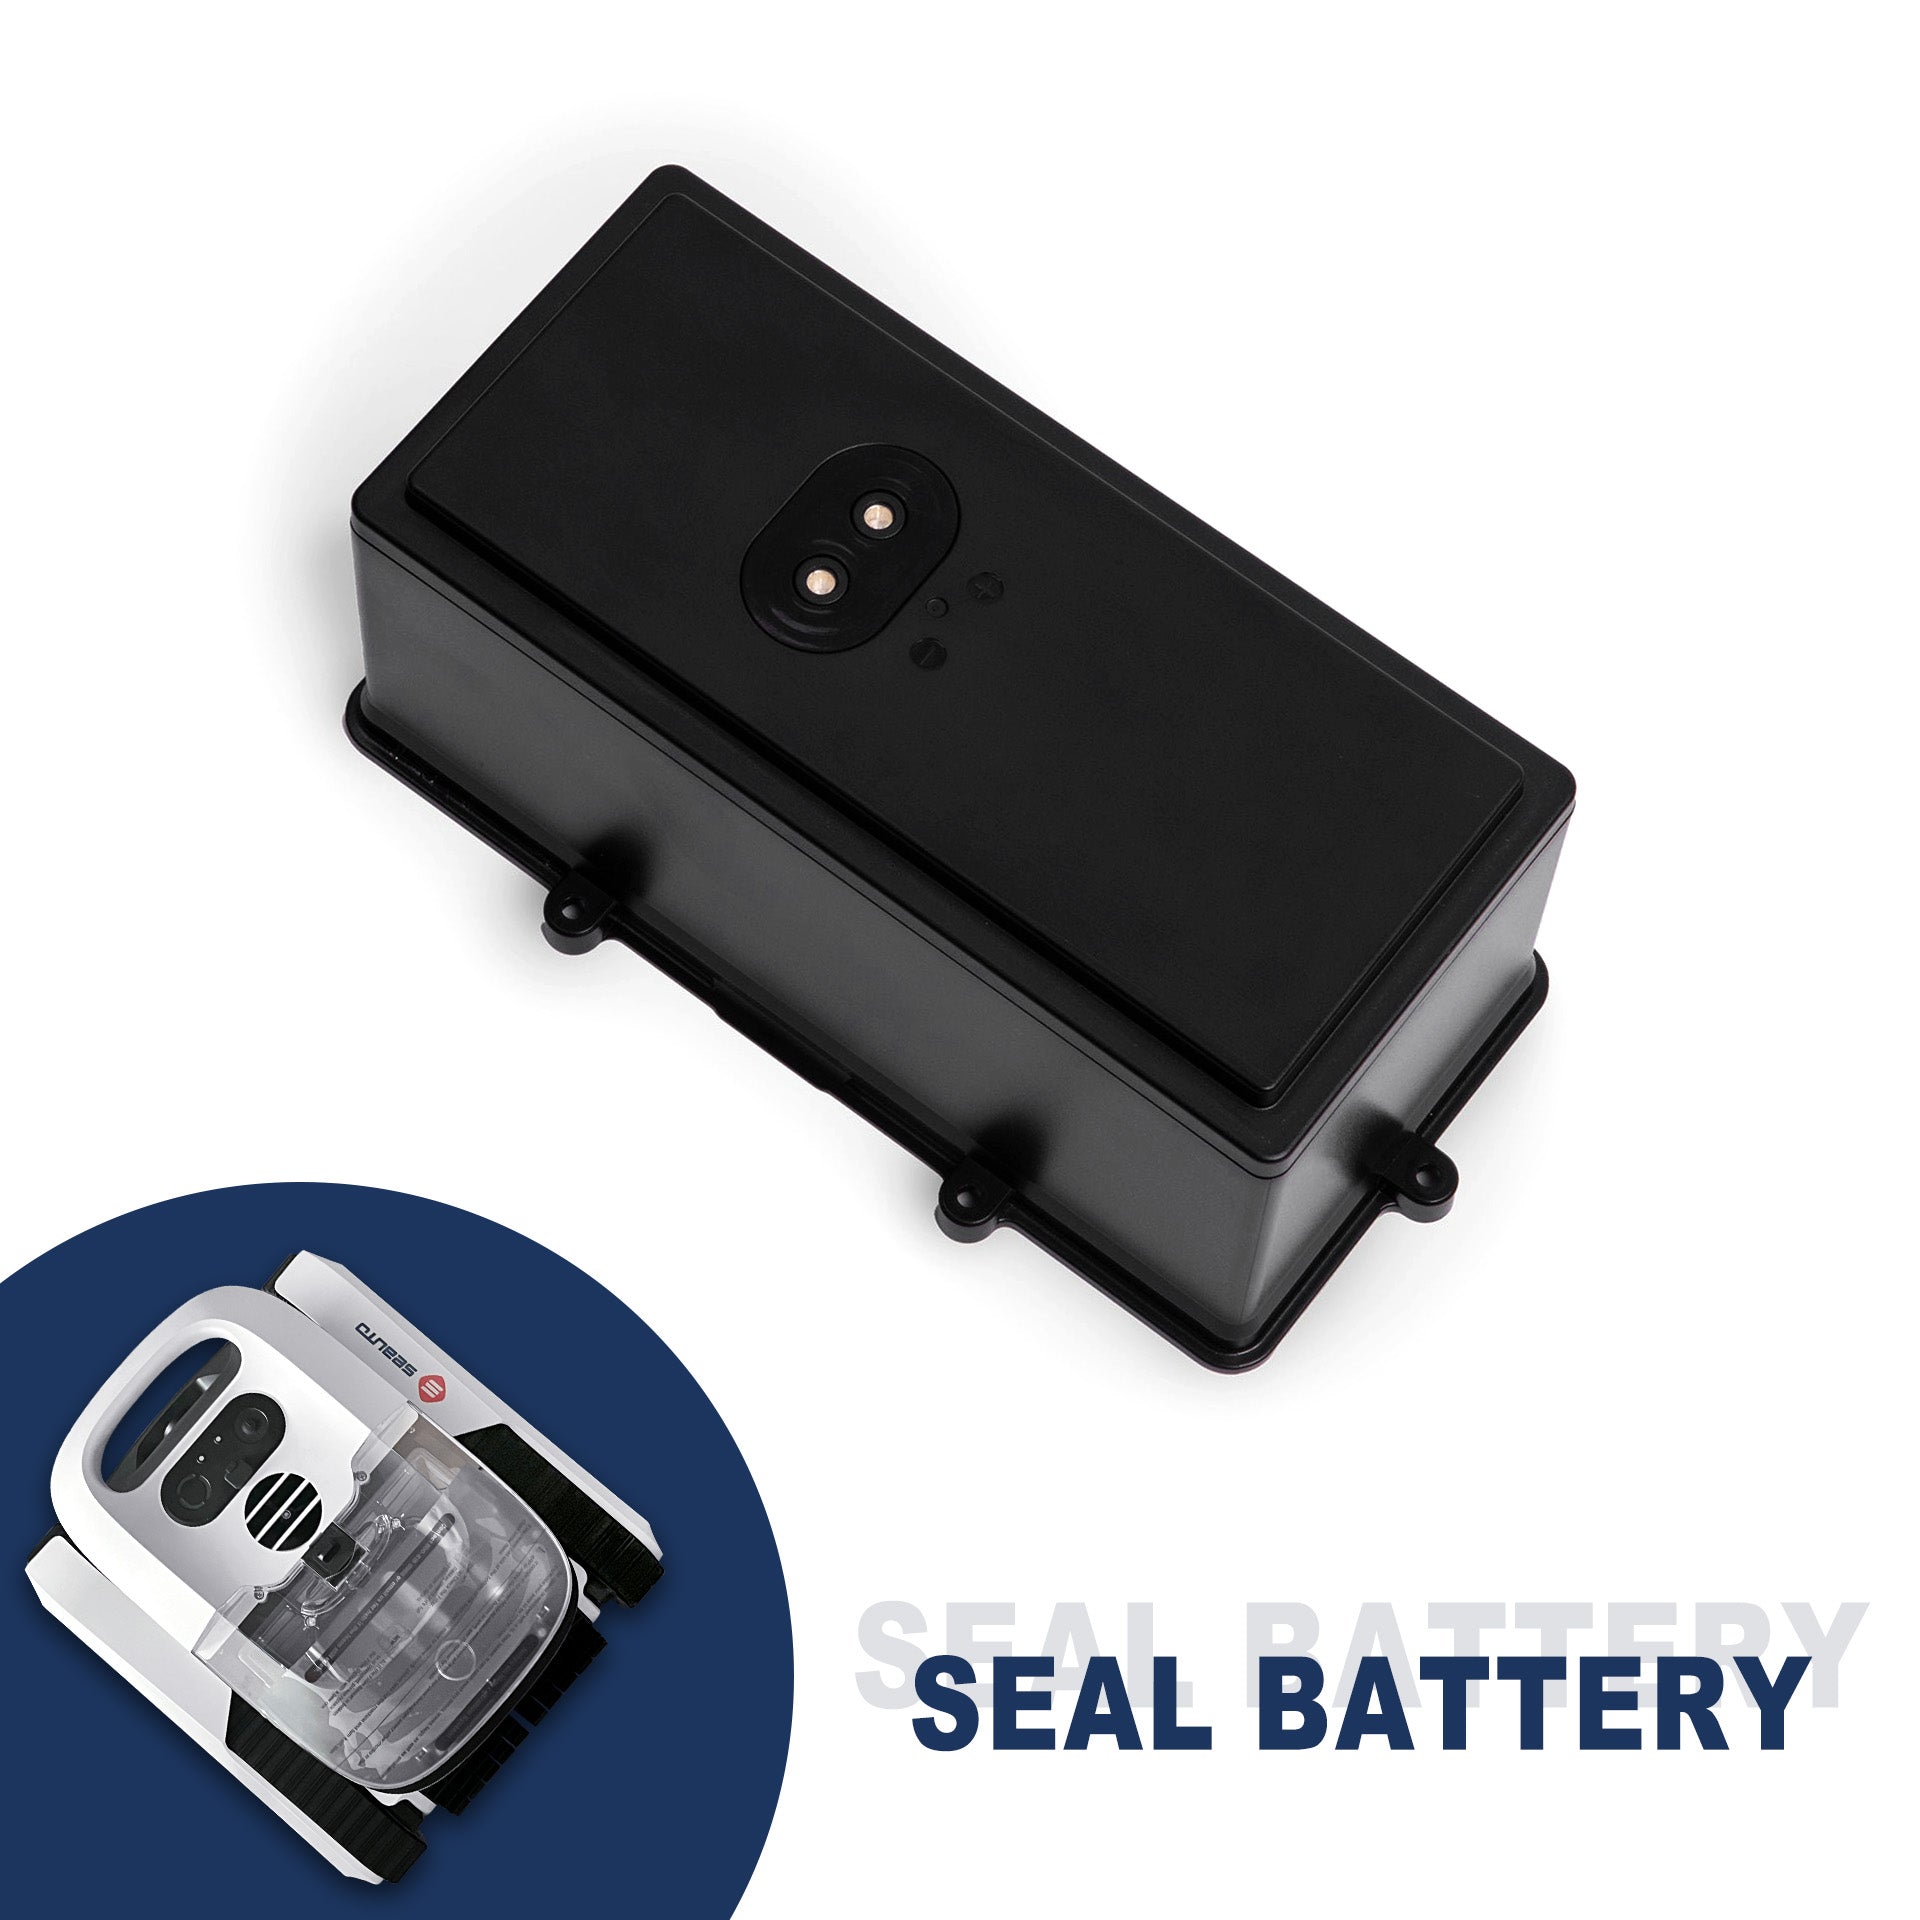 Seal Battery